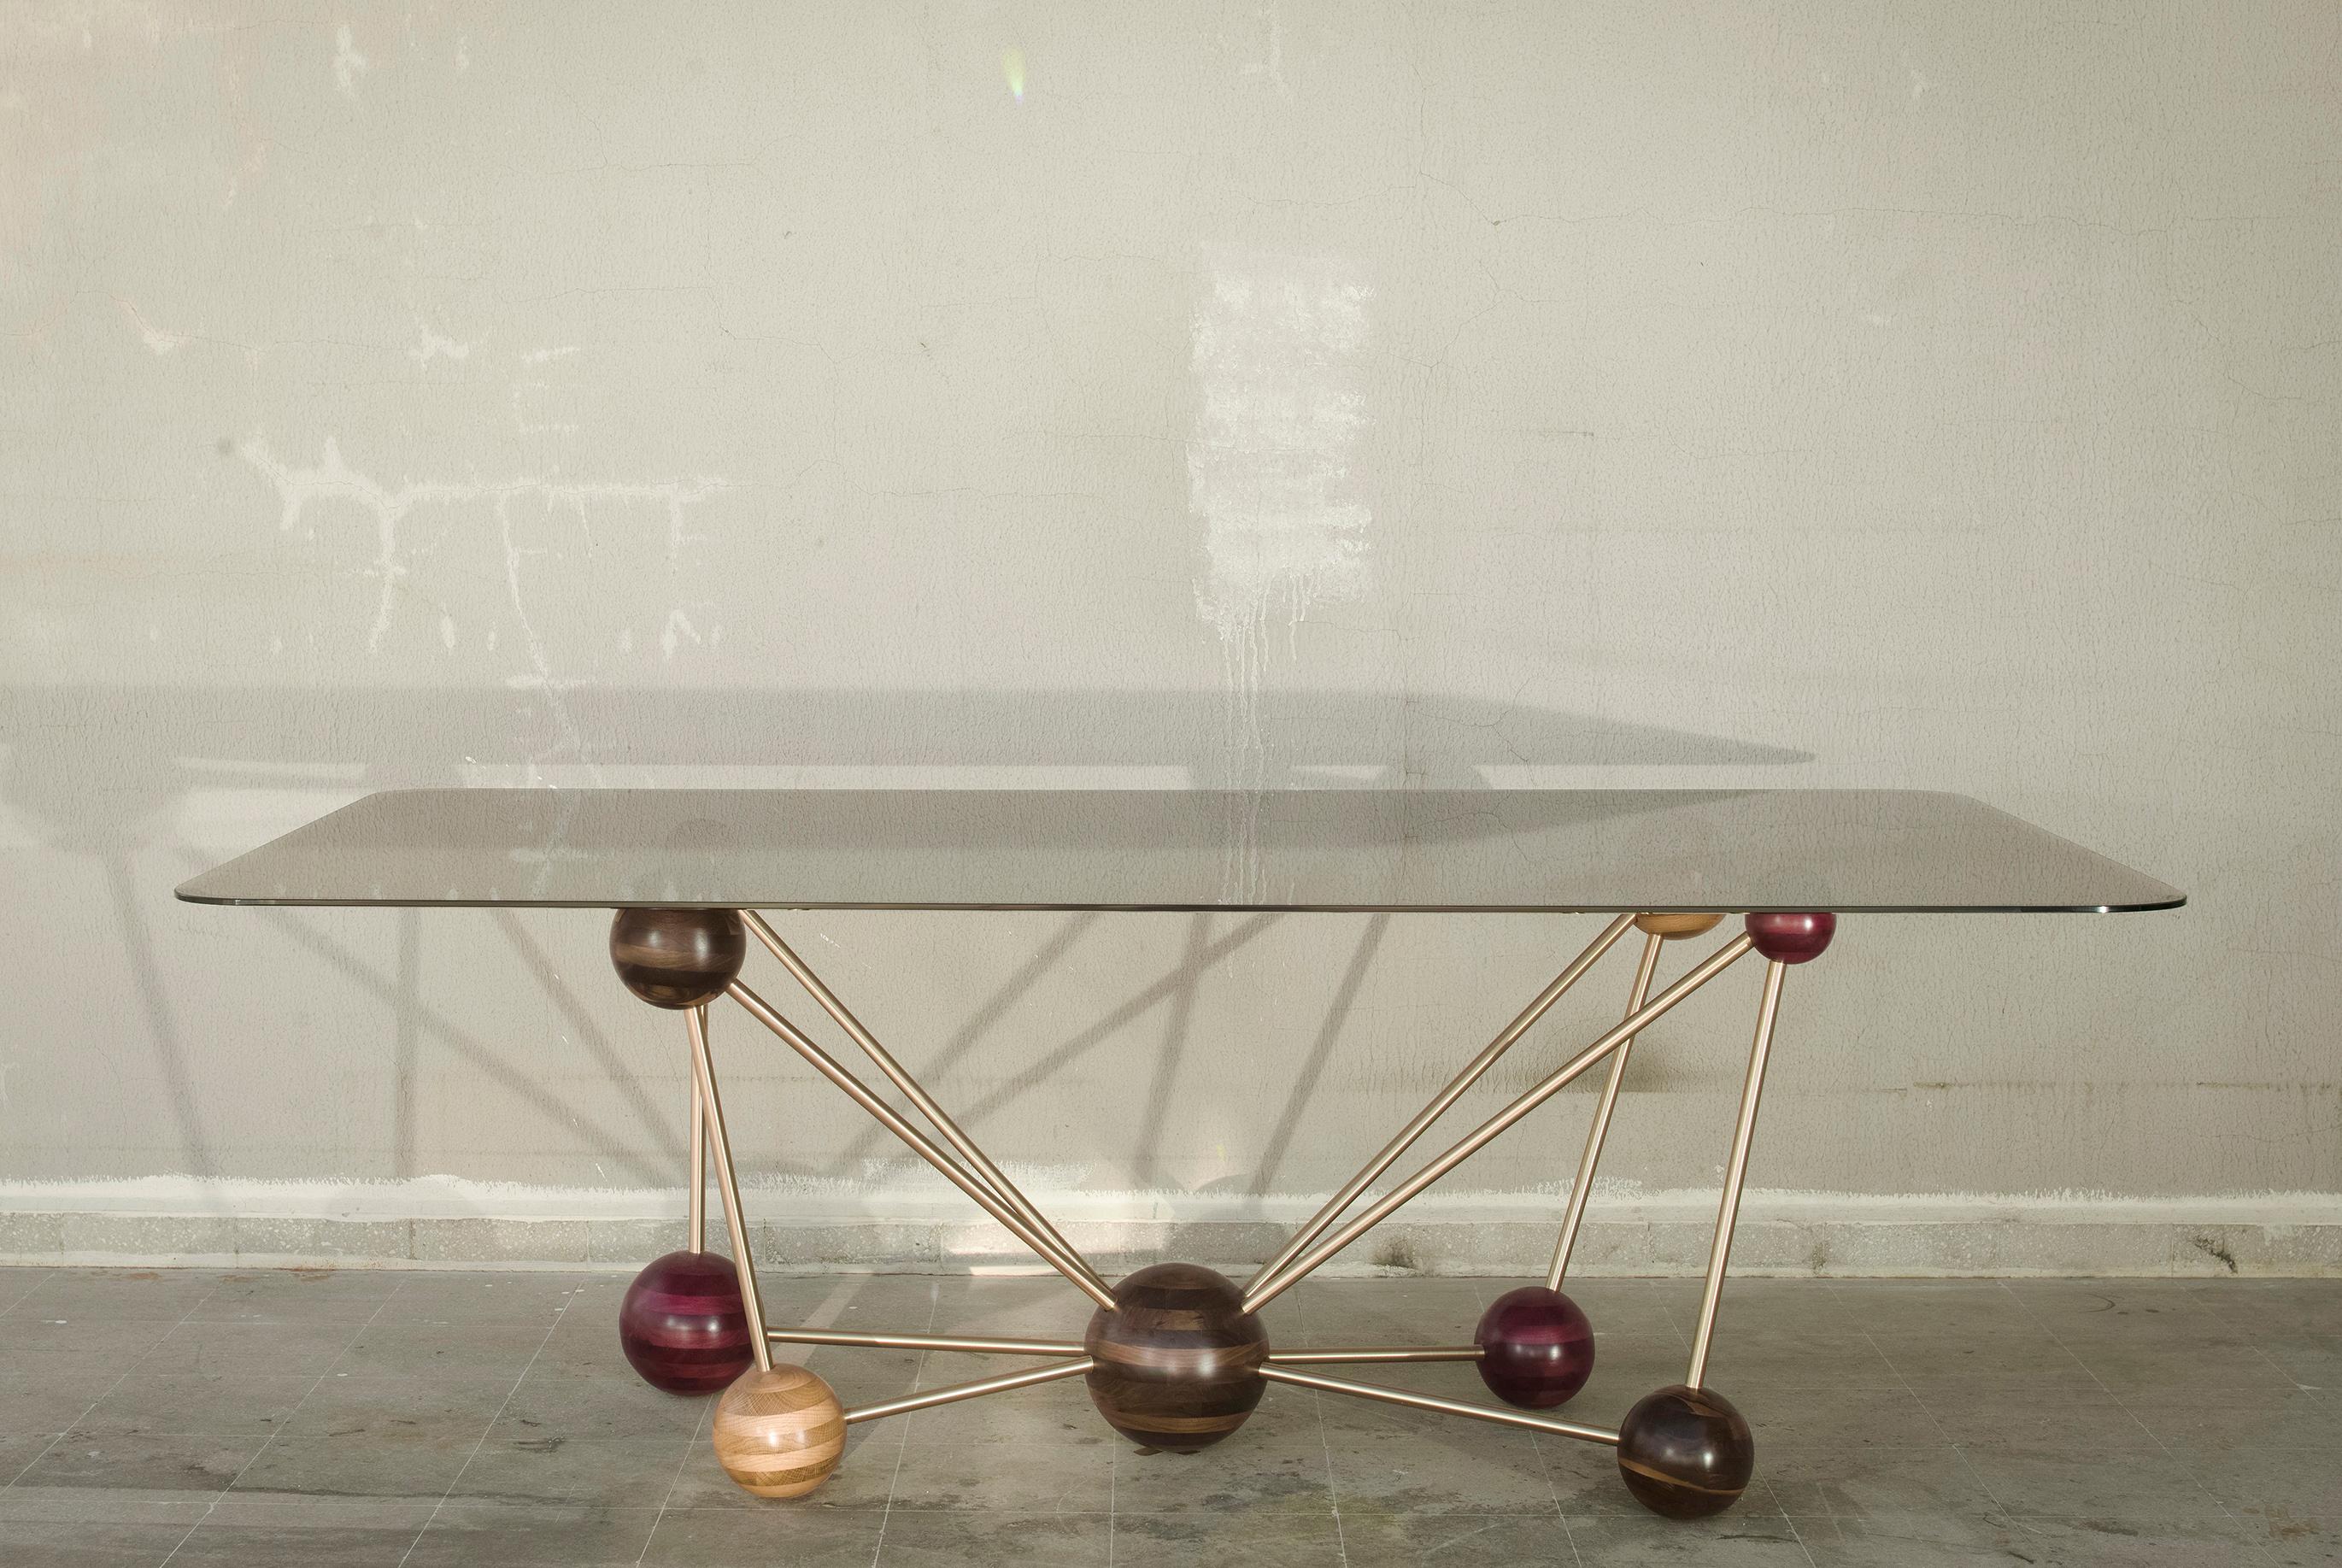 Molecule, Georges Mohasseb Design, 2014
Mixing Art and Chemistry, using natural material and natural alloys to build this beautiful dining table, molecule. For the base, brushed brass sleek rods are connected with perfect round-shaped solid wood